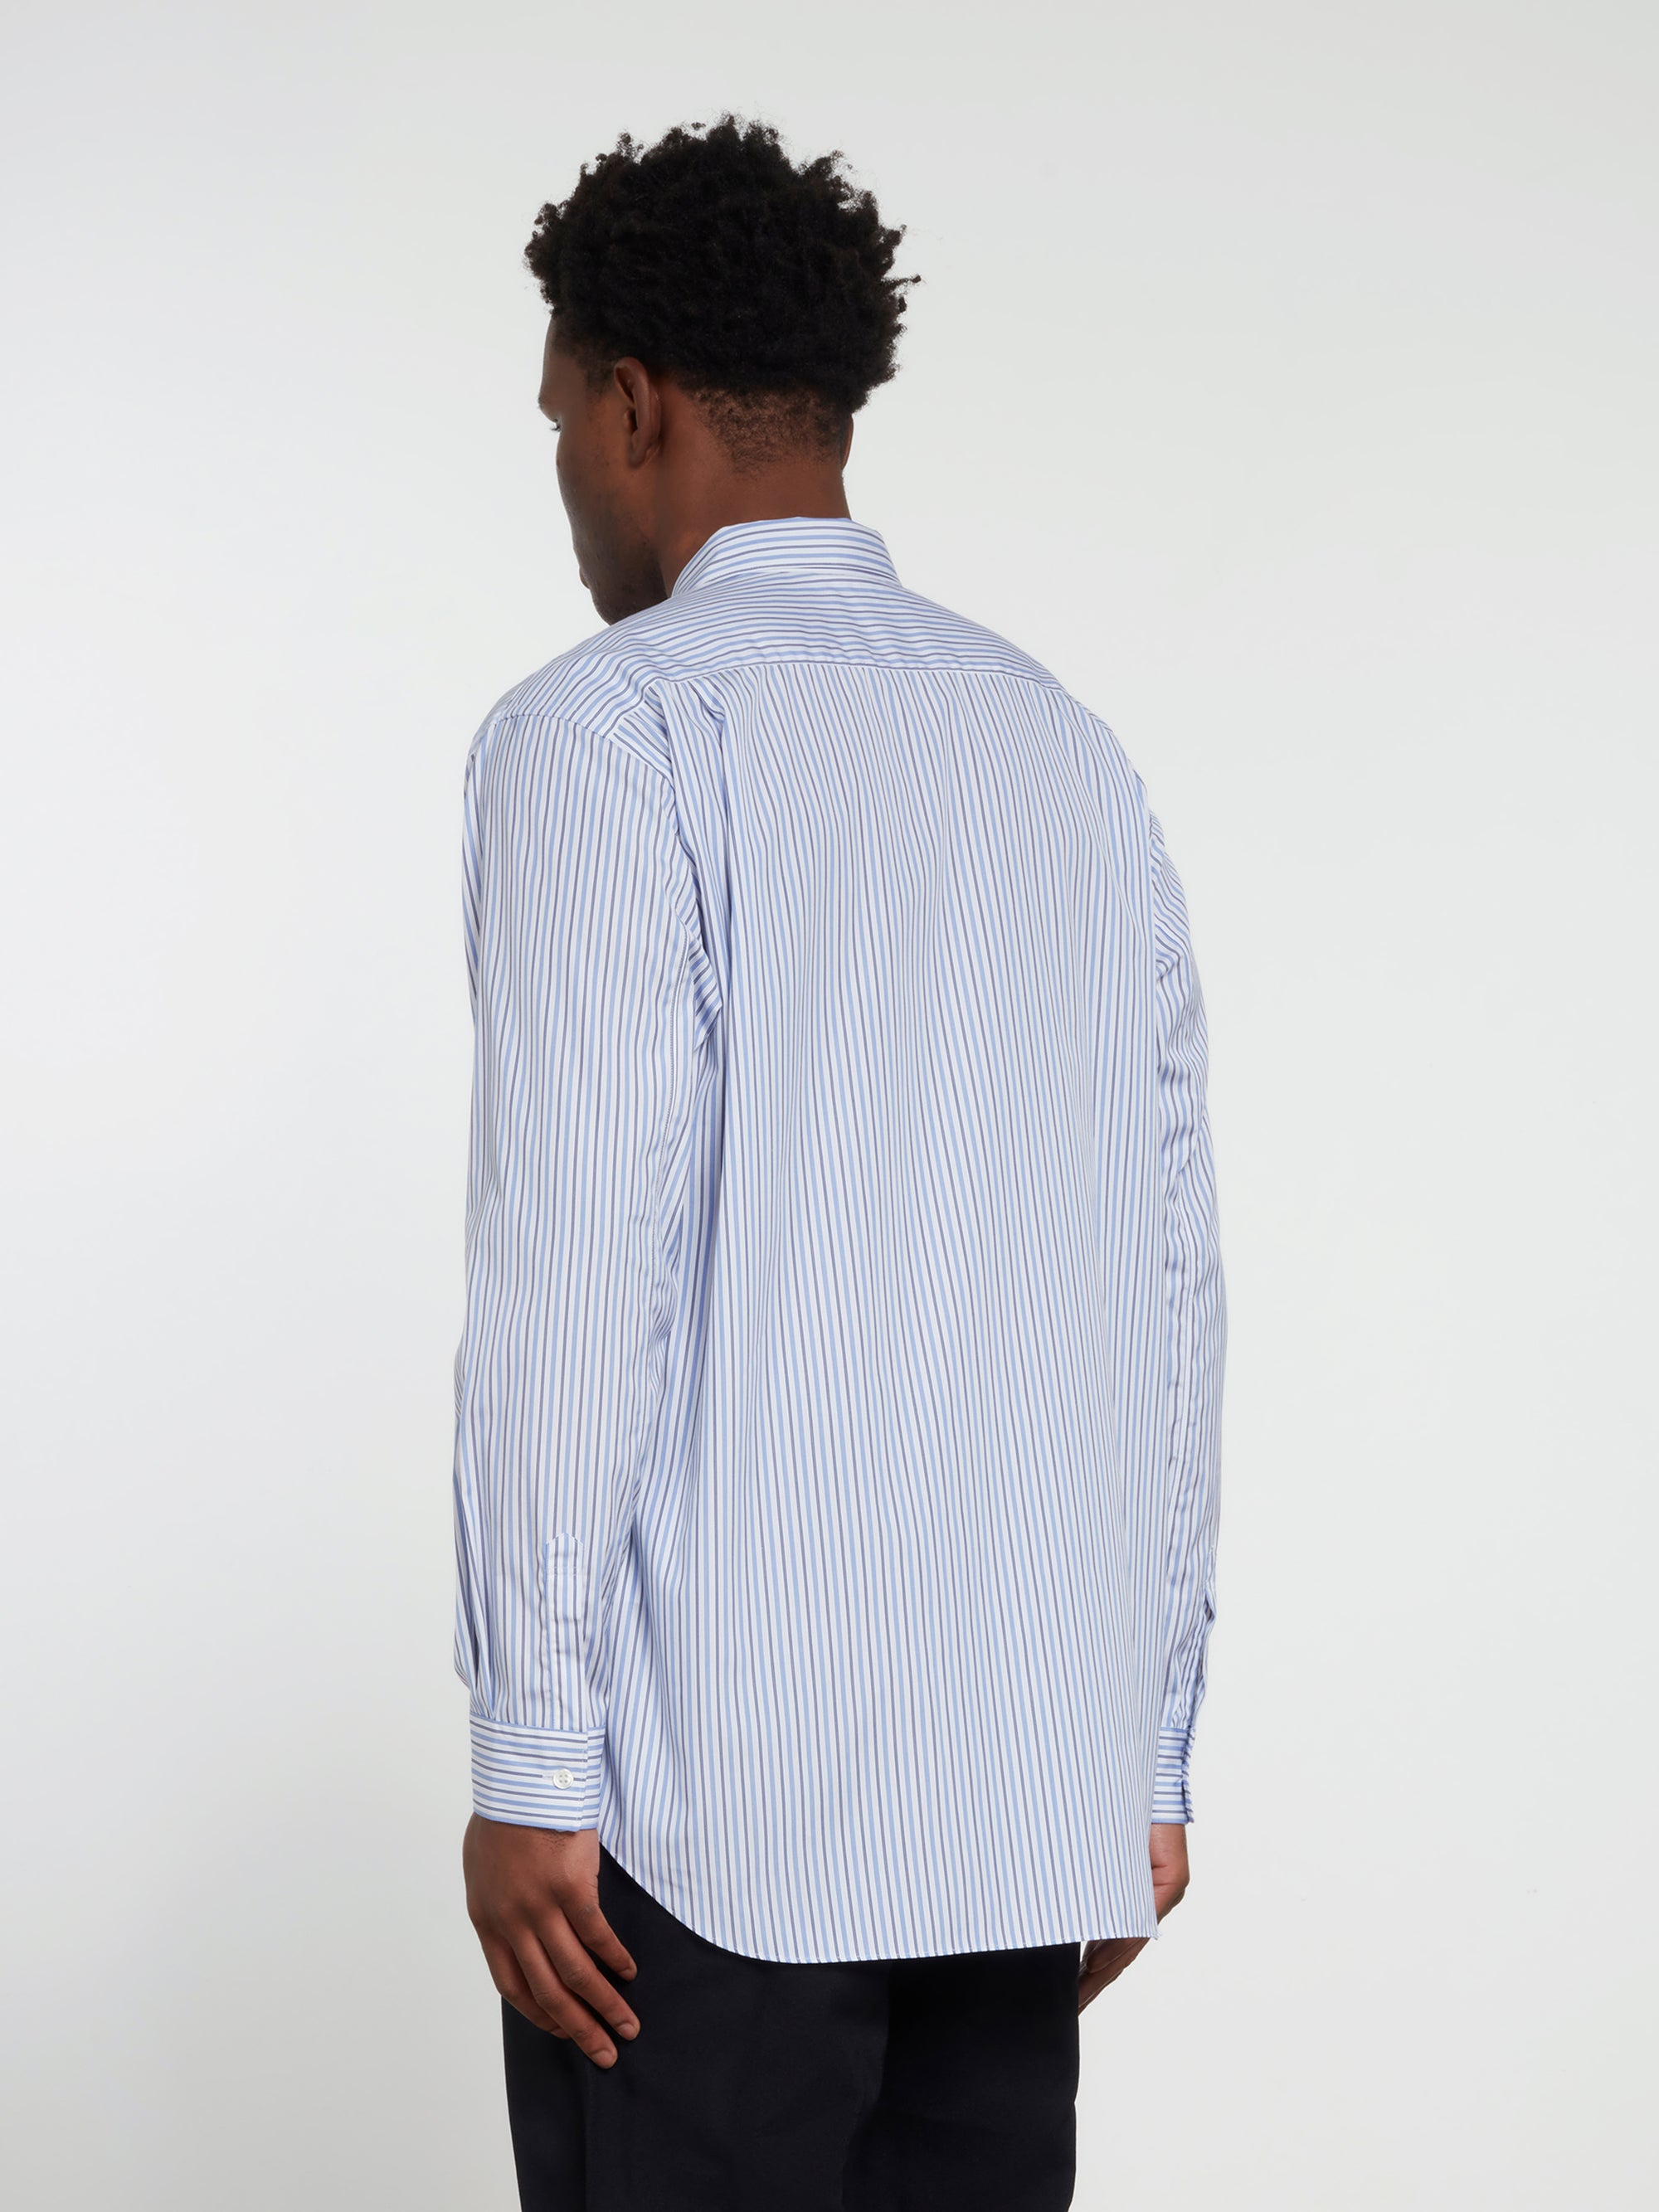 CDG Shirt Forever - Classic Fit Contrast Stripe Shirt - (Stripe/Mix) view 4